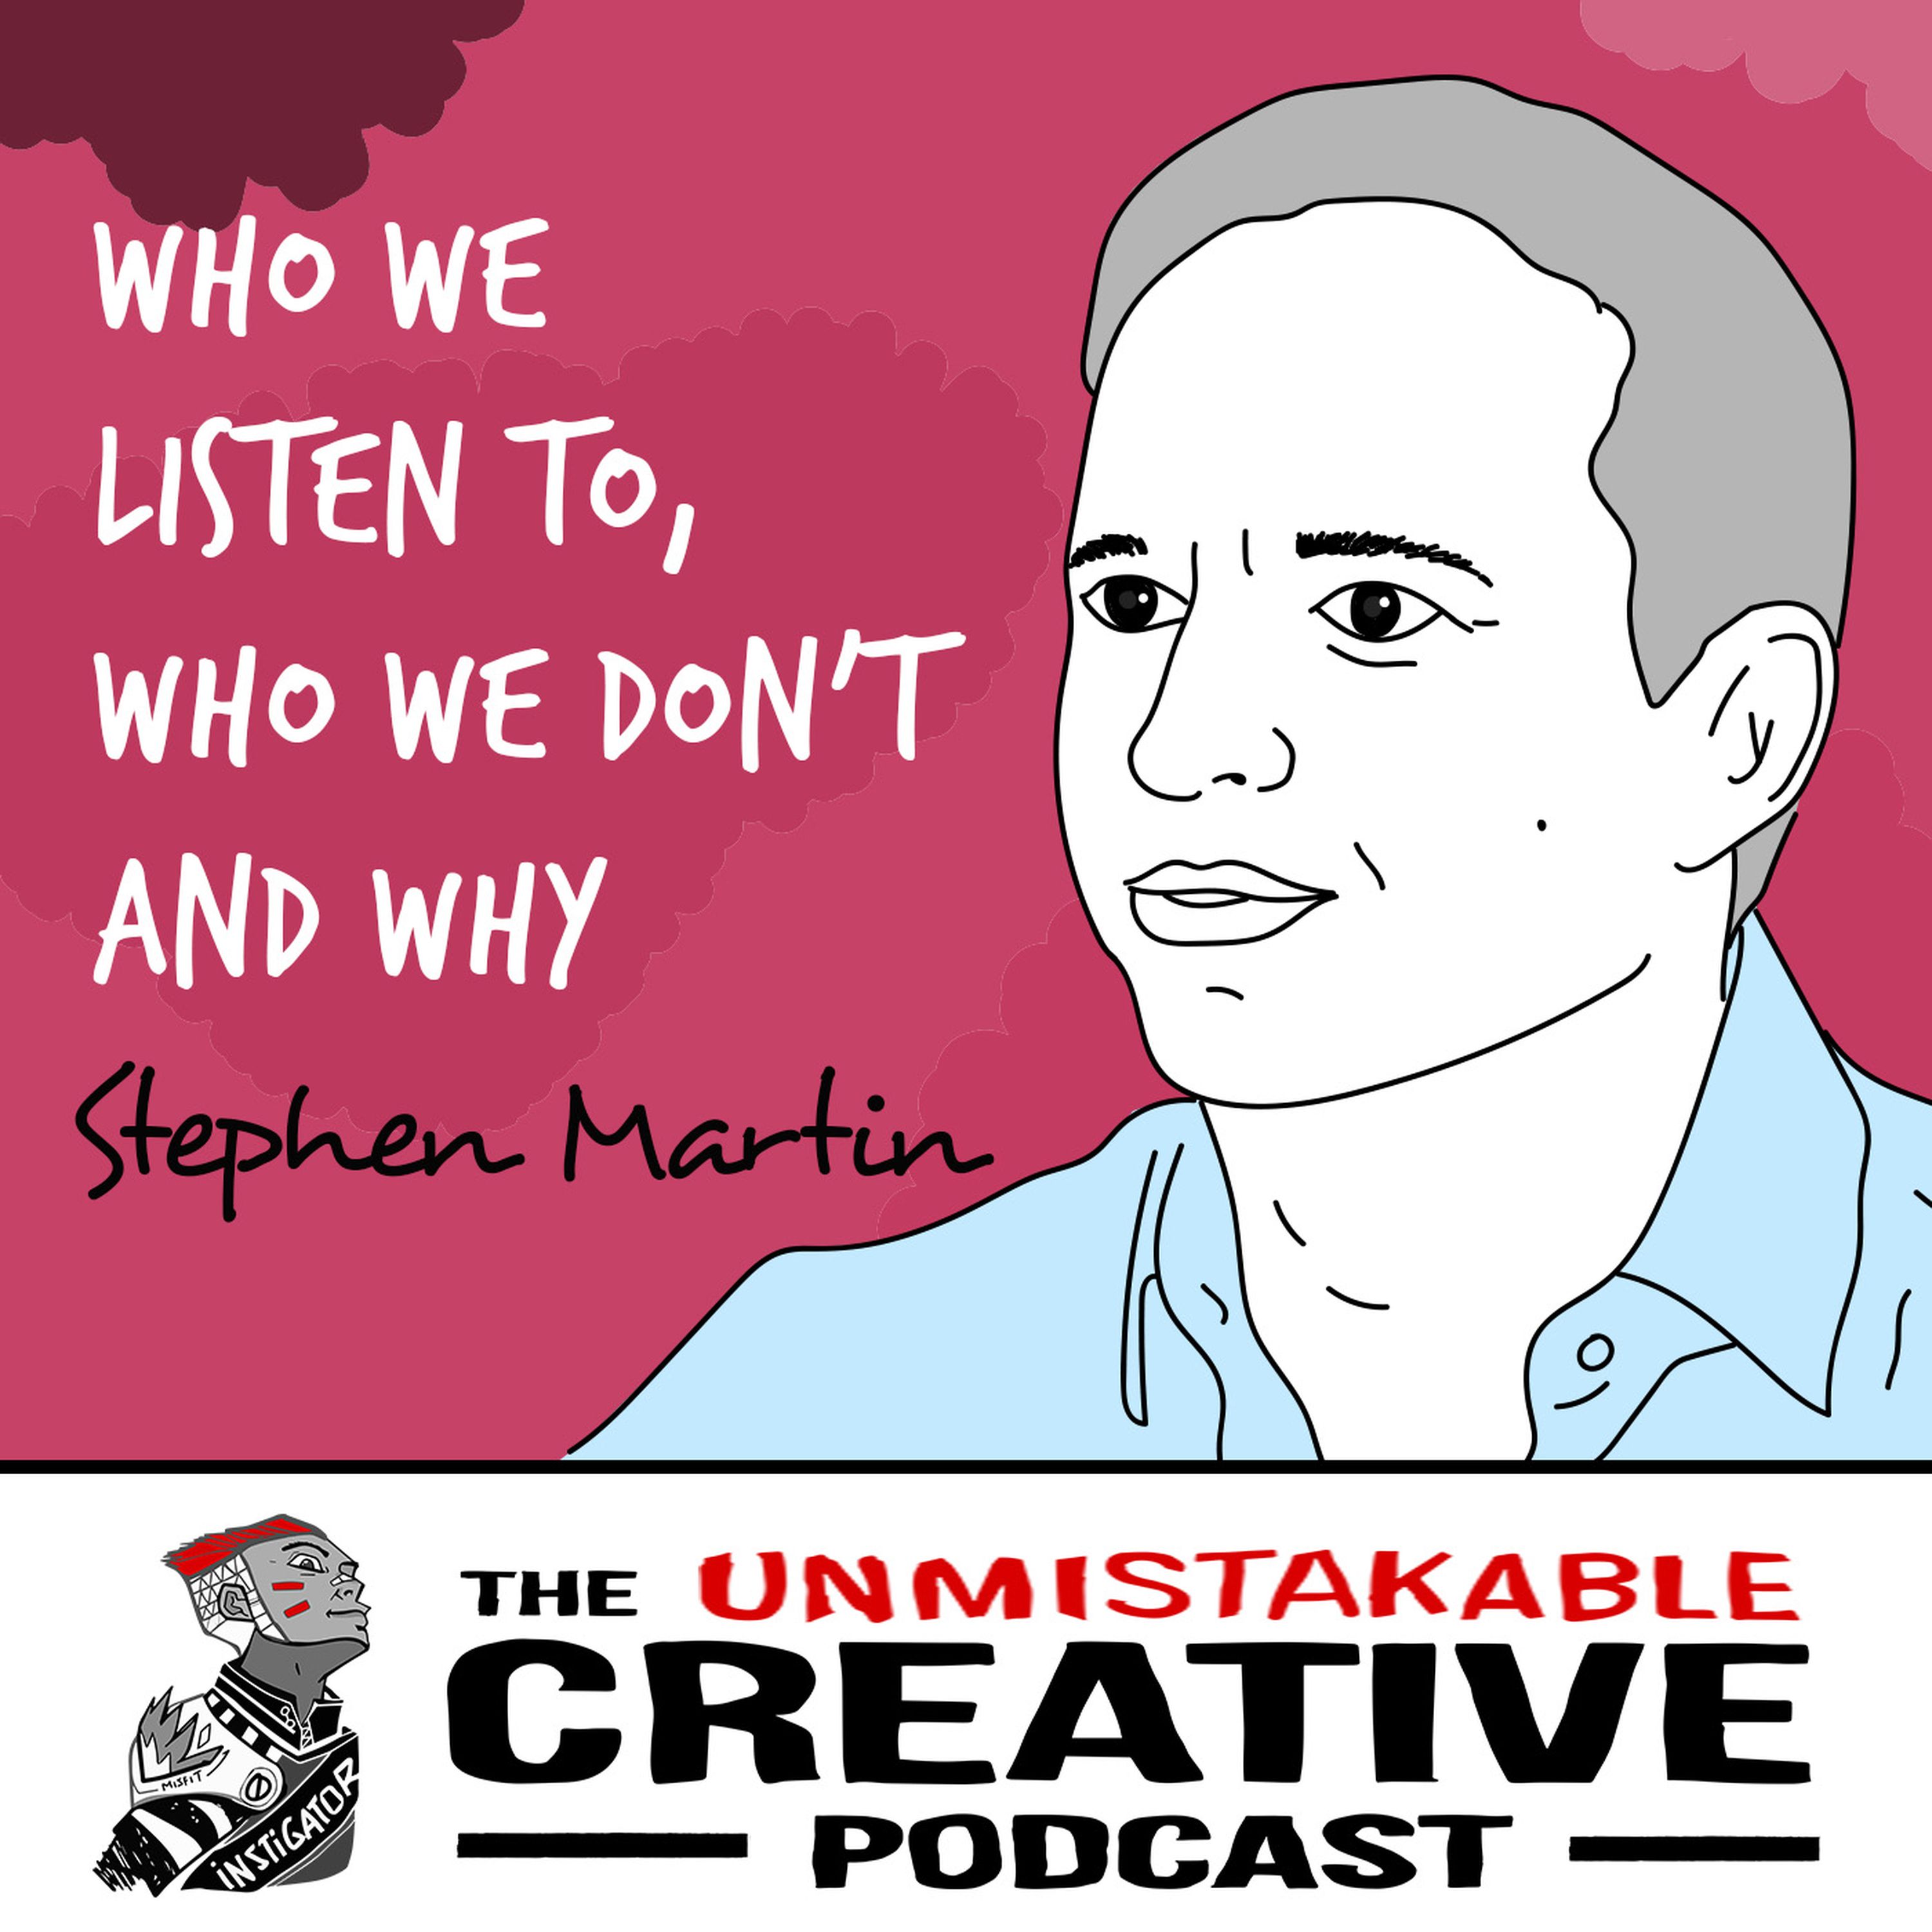 Stephen Martin: Who We Listen To, Who We Don't, and Why Image